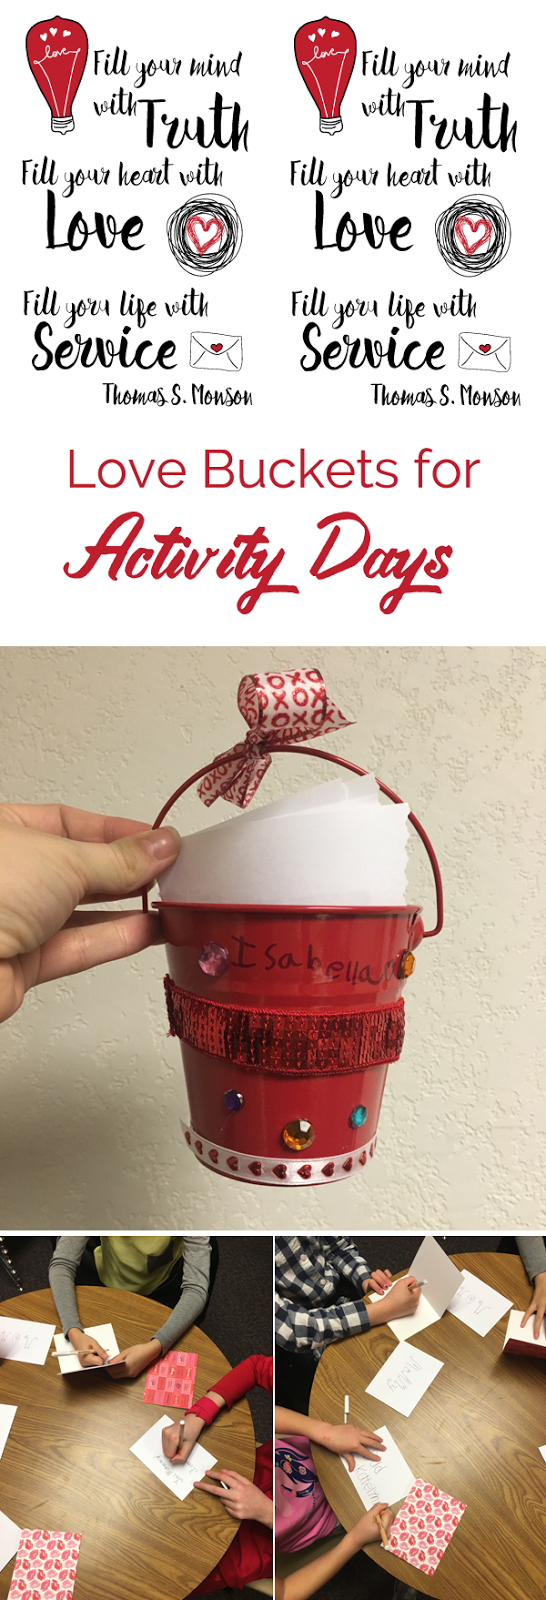 Love Buckets for Activity Days with Free Printable